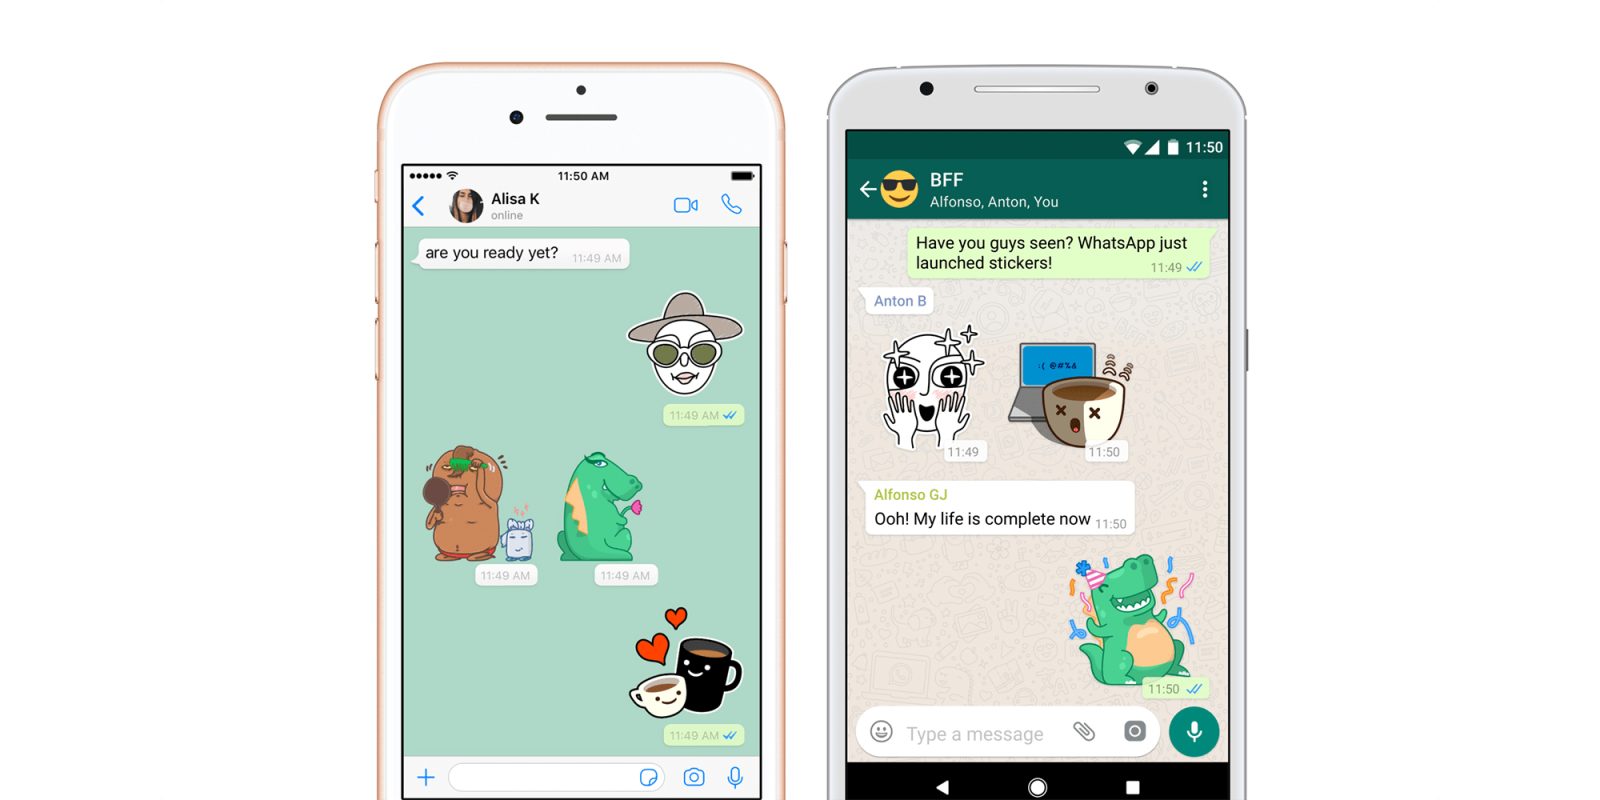 WhatsApp stickers are finally here - 9to5Google